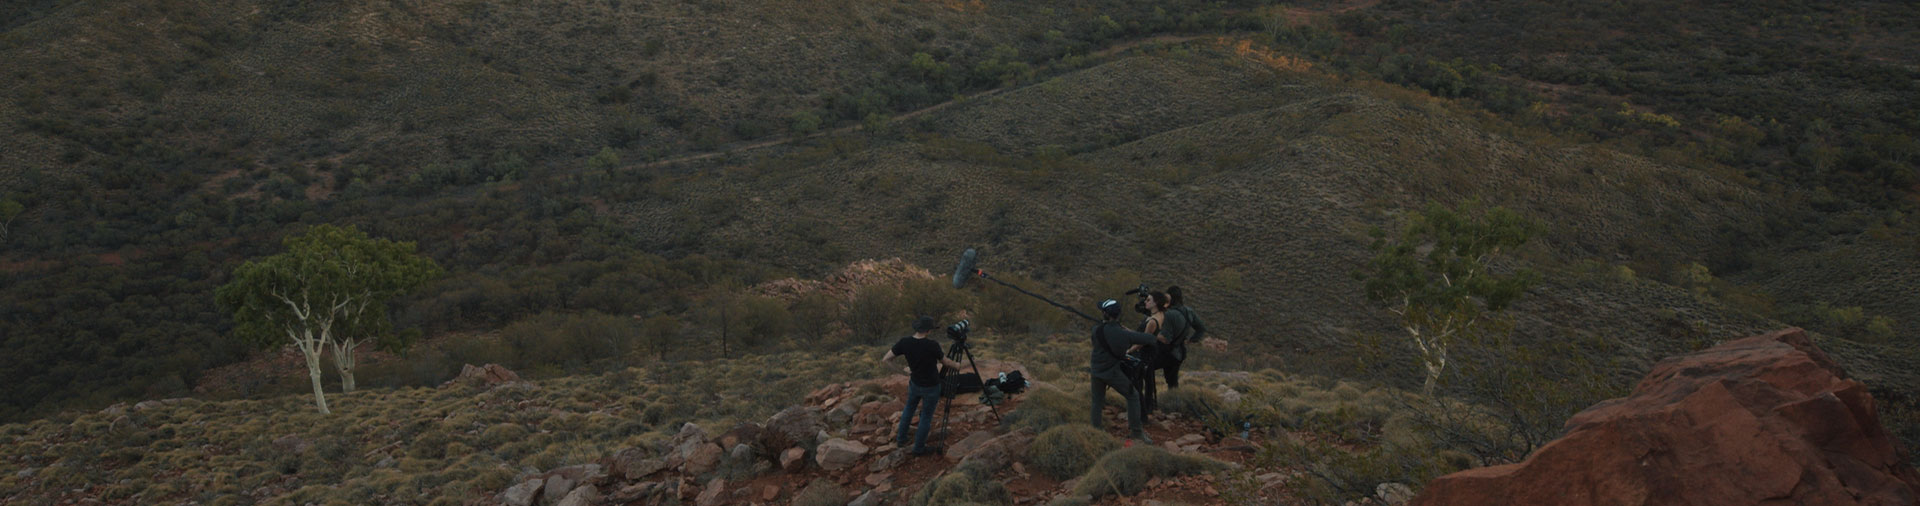 ilm-crew-in-the-australian-landscape-small-in-the-frame-of-vast-rocky-earth